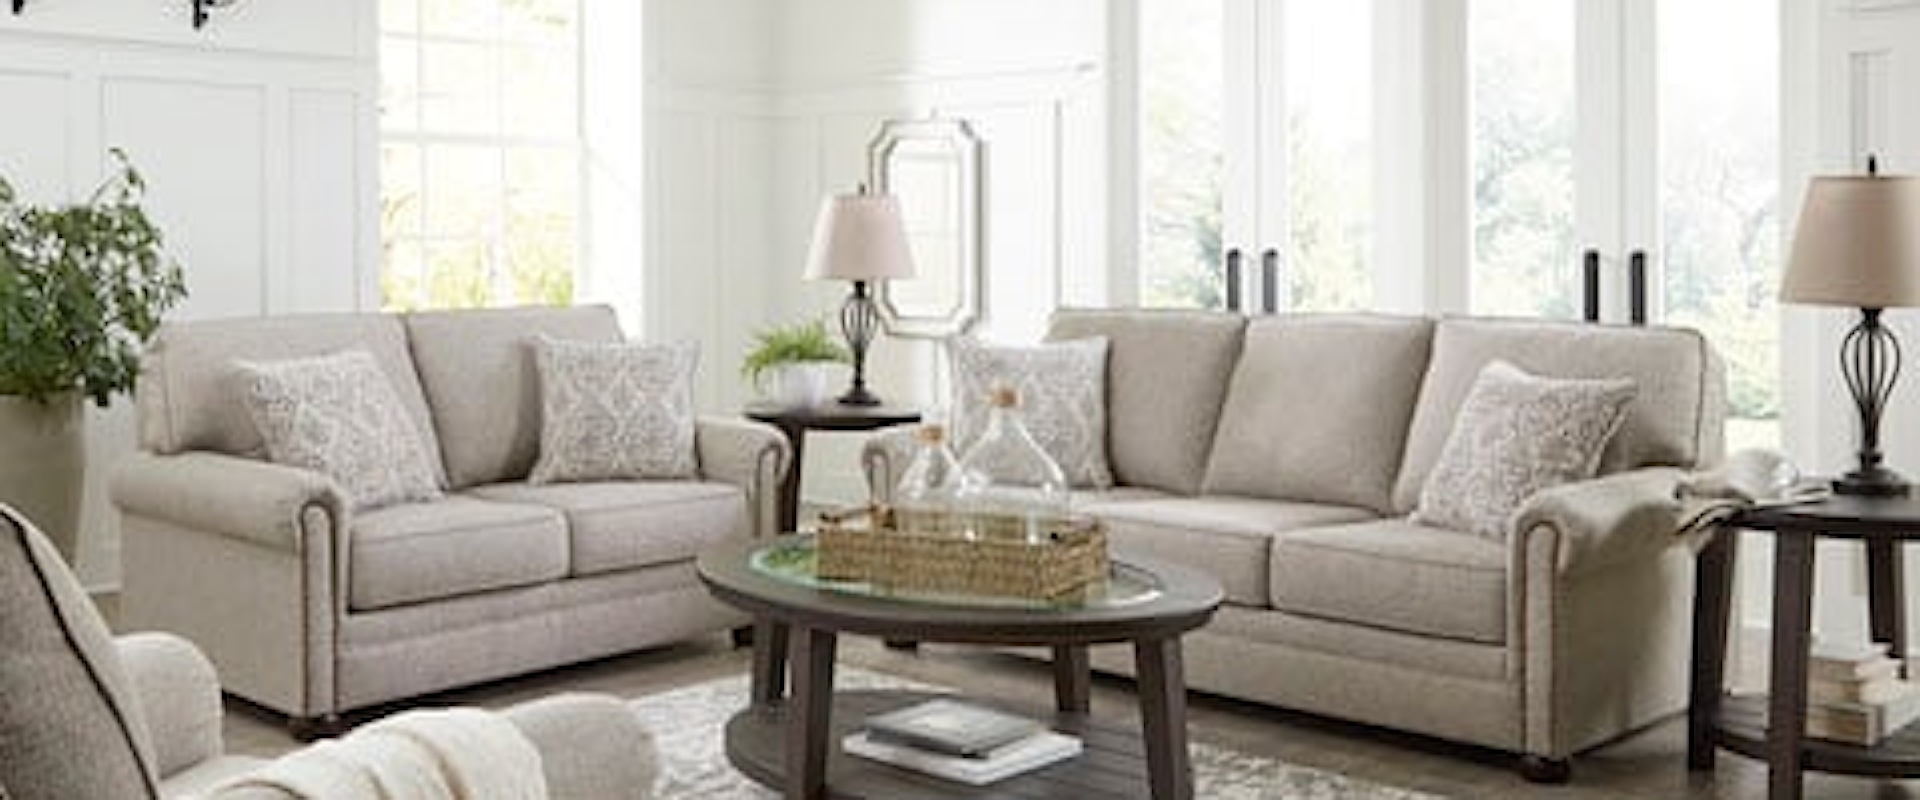 Sofa, Loveseat and Chair